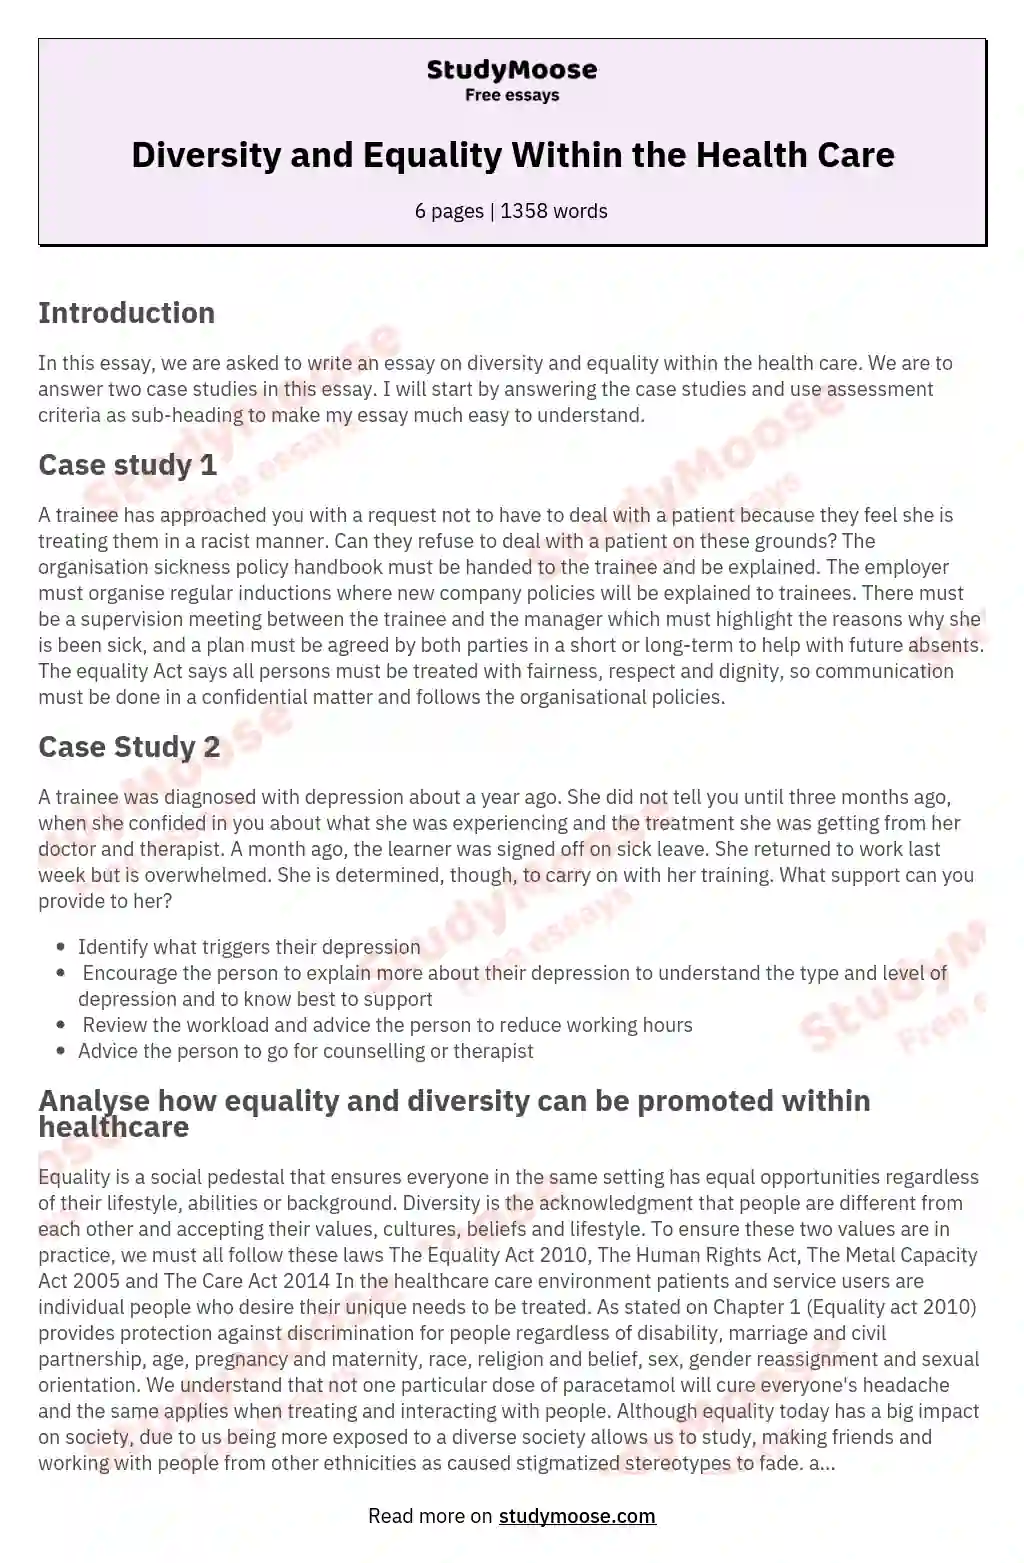 diversity and inclusion in healthcare essay